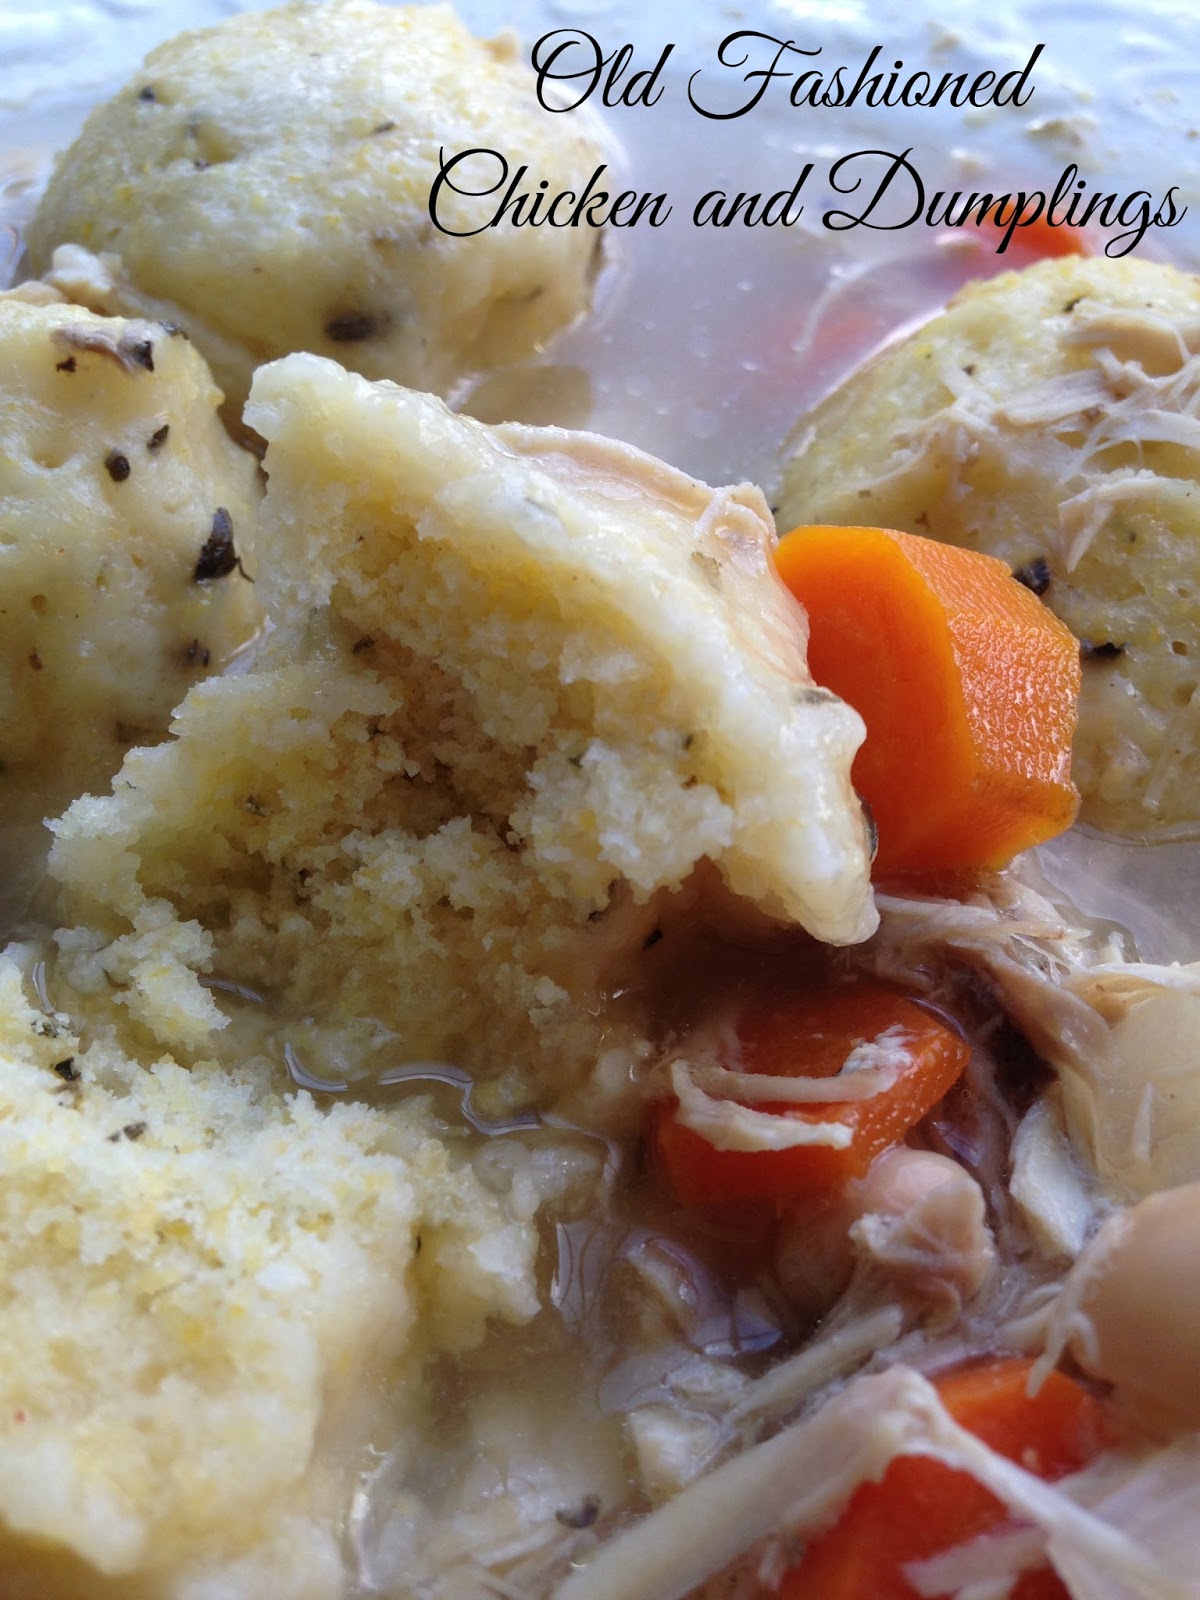 Turnips 2 Tangerines: Old Fashioned Chicken and Dumplings